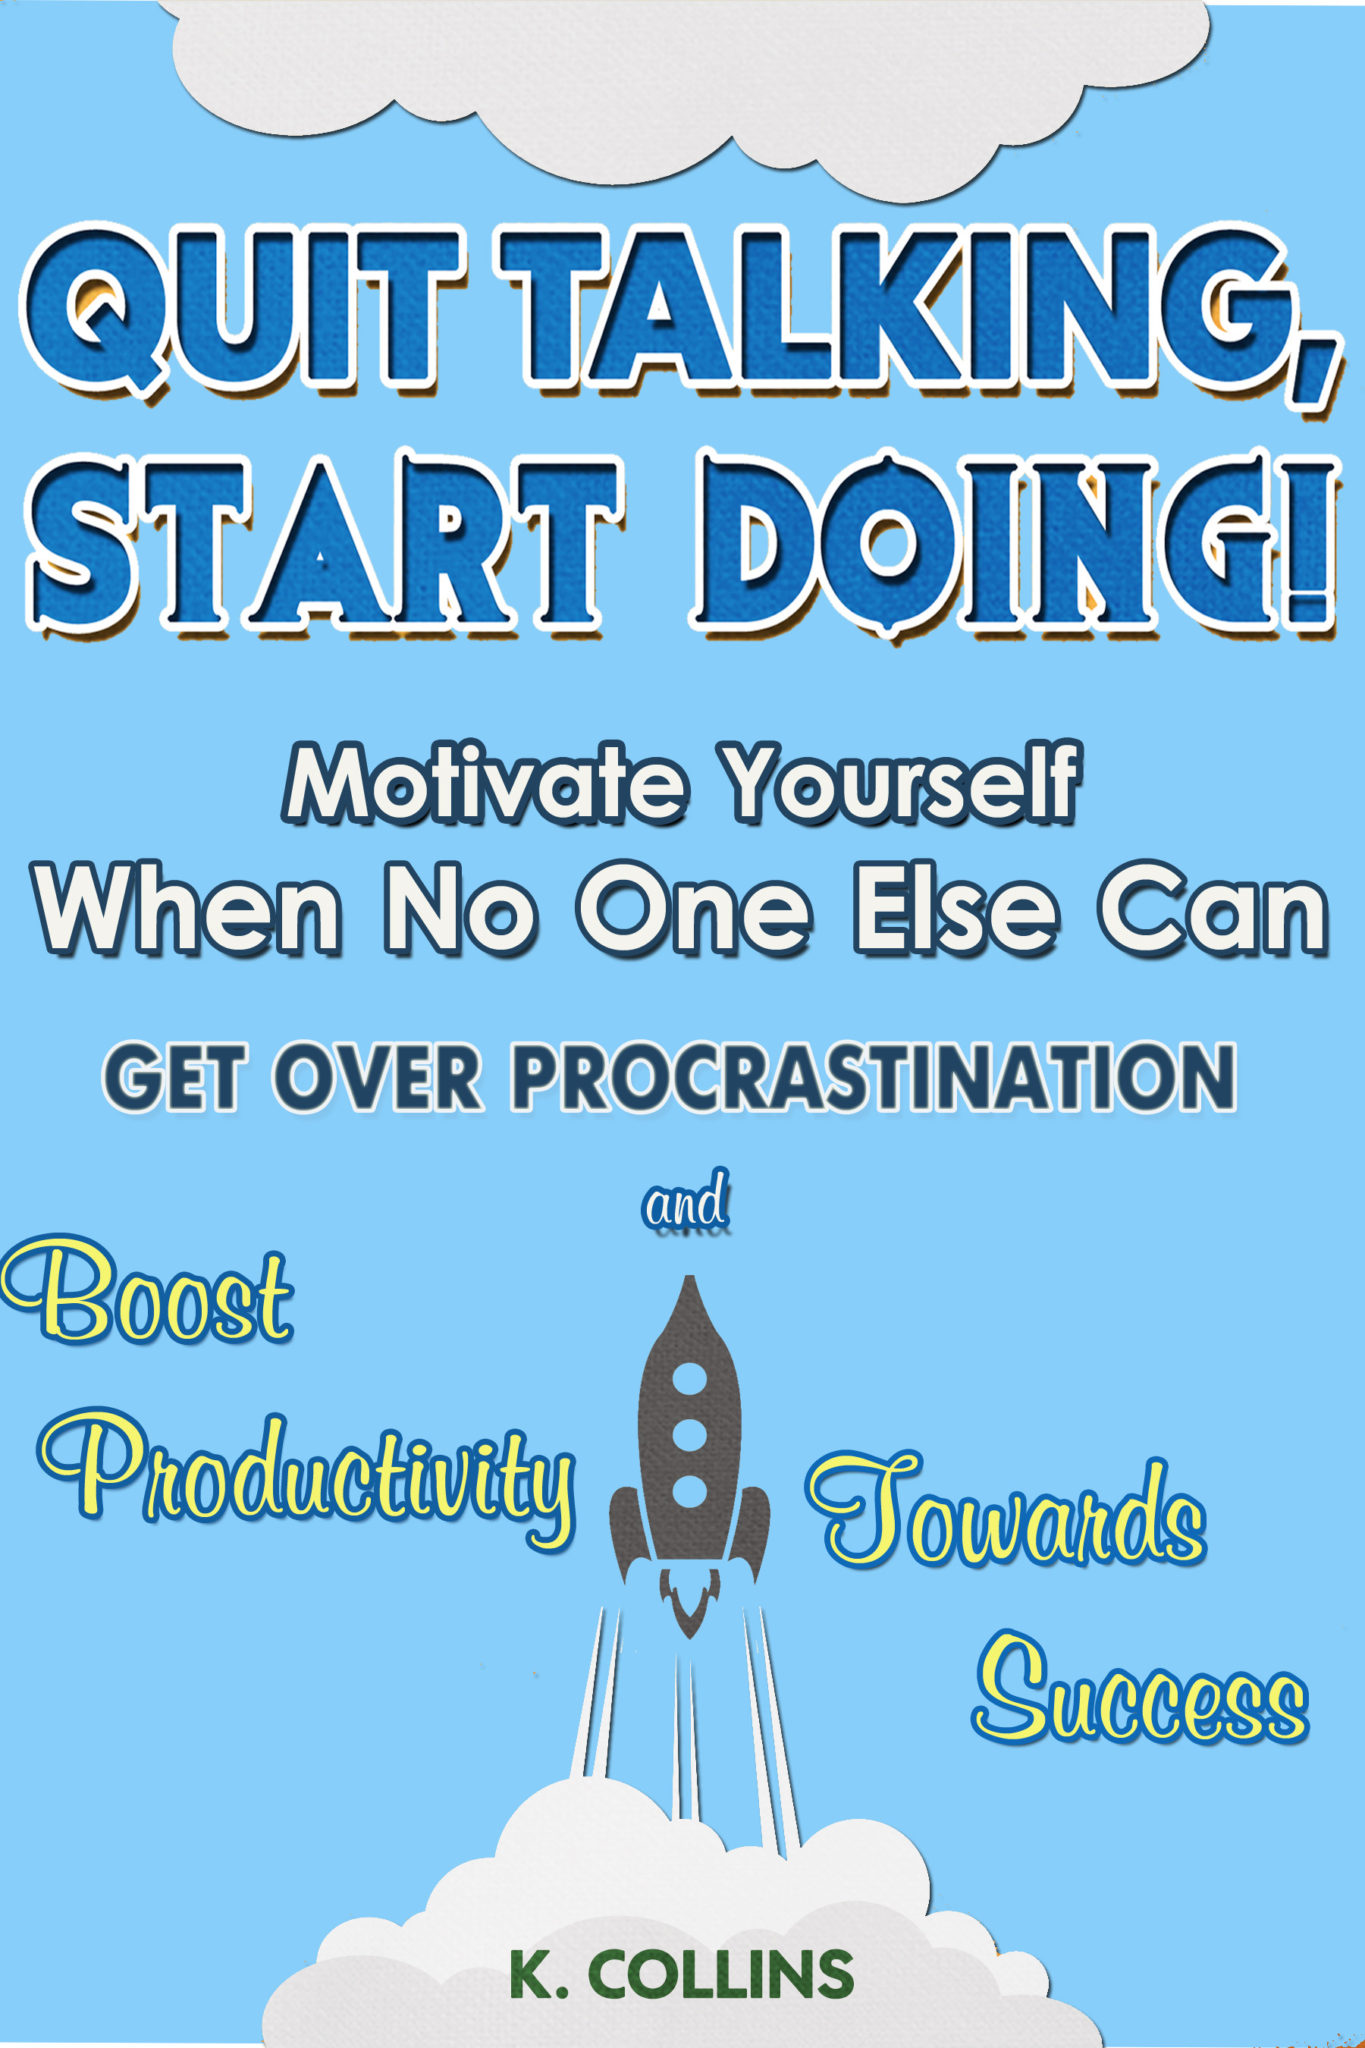 FREE: Quit Talking, Start Doing! Motivate Yourself When No One Else Can by K. Collins